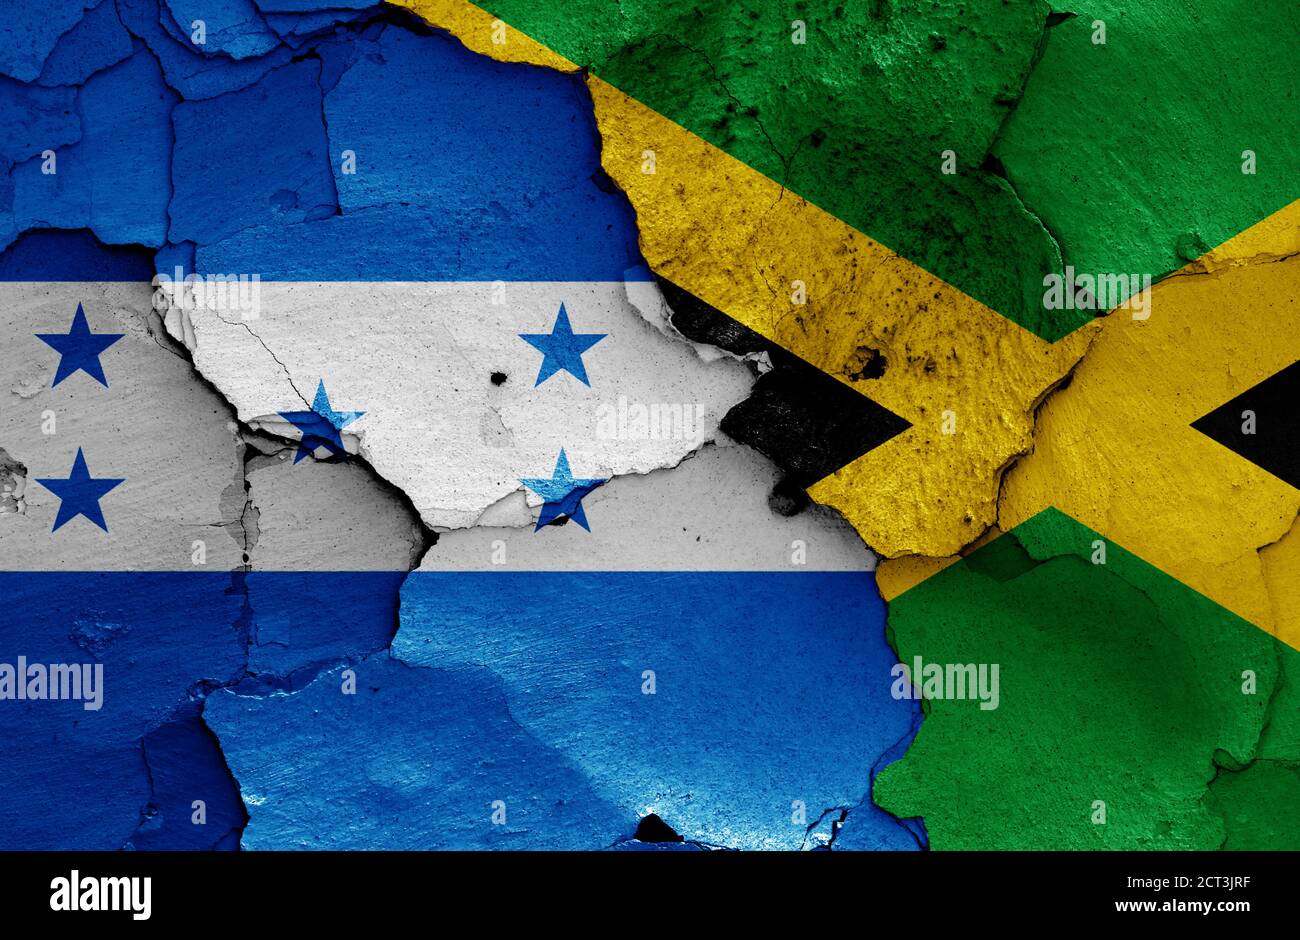 flags of Honduras and Jamaica painted on cracked wall Stock Photo